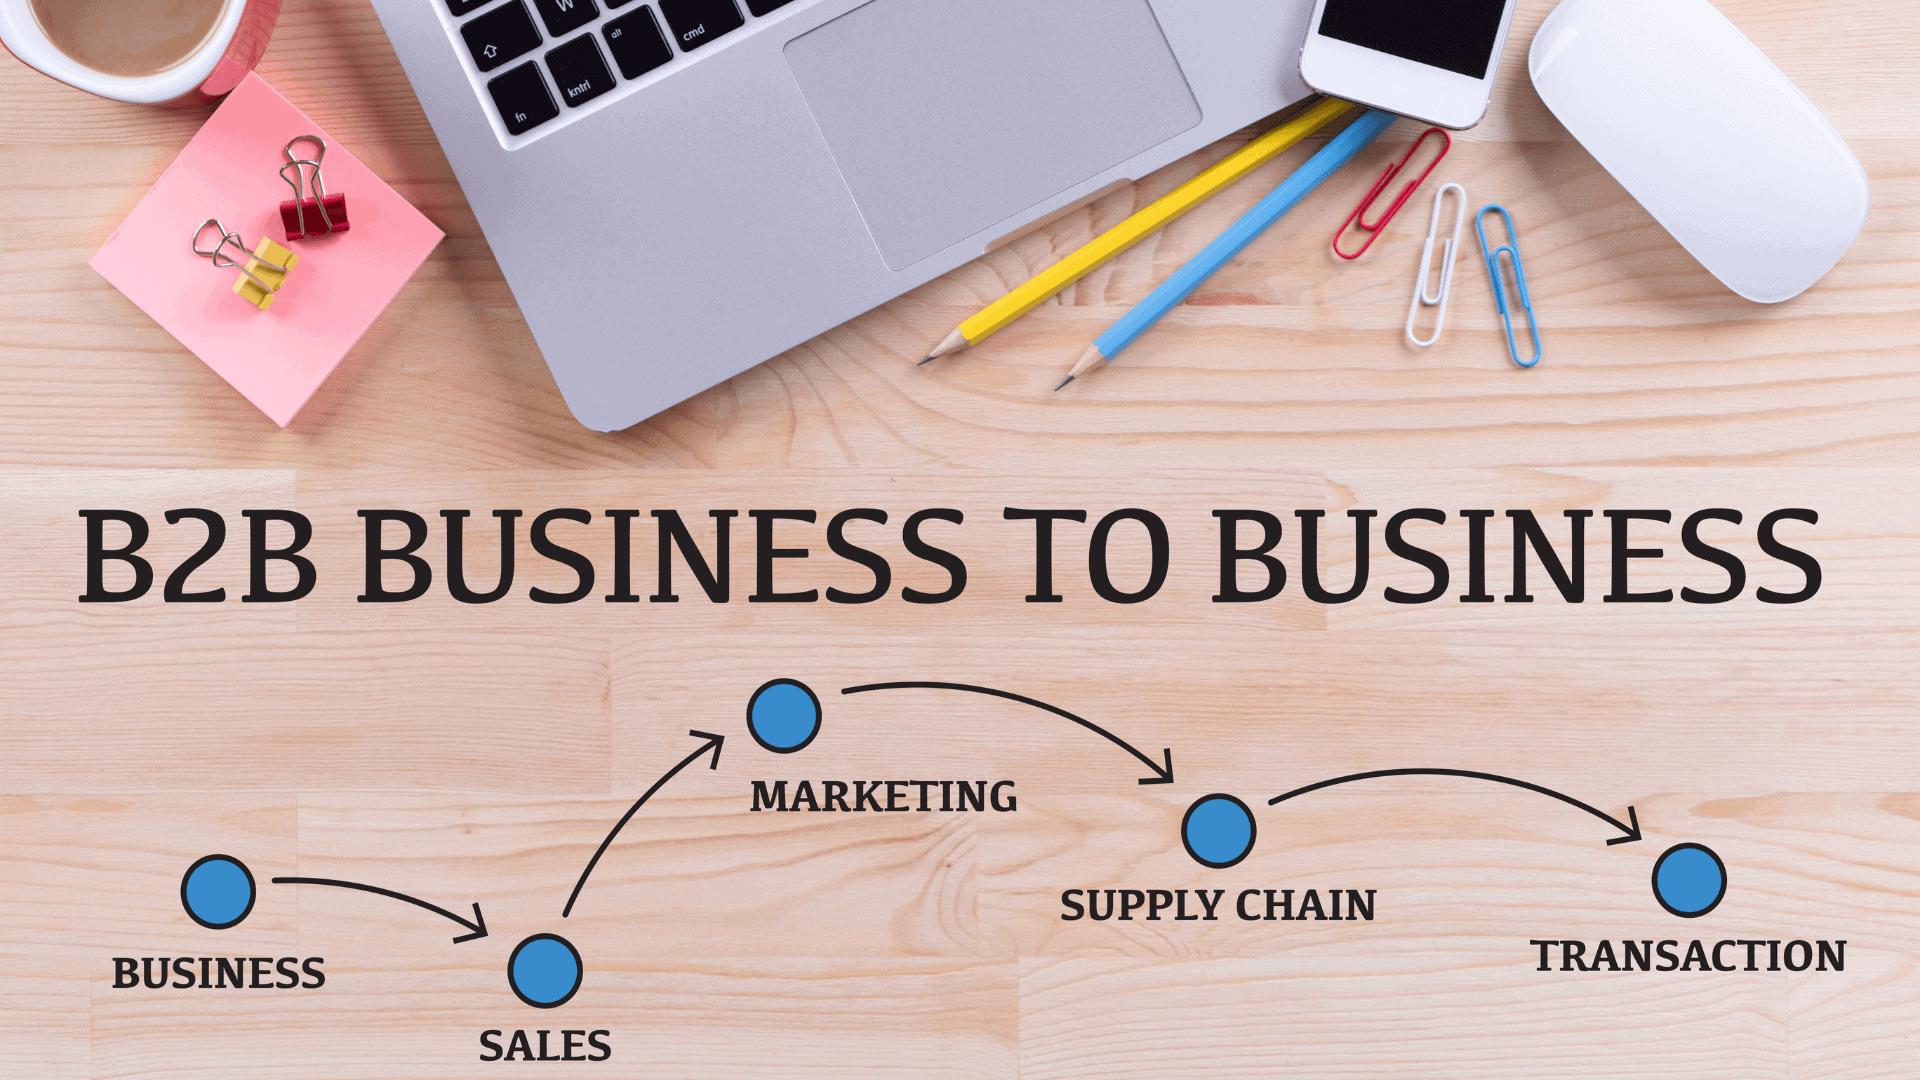 B2B (Business-to-Business) Markets